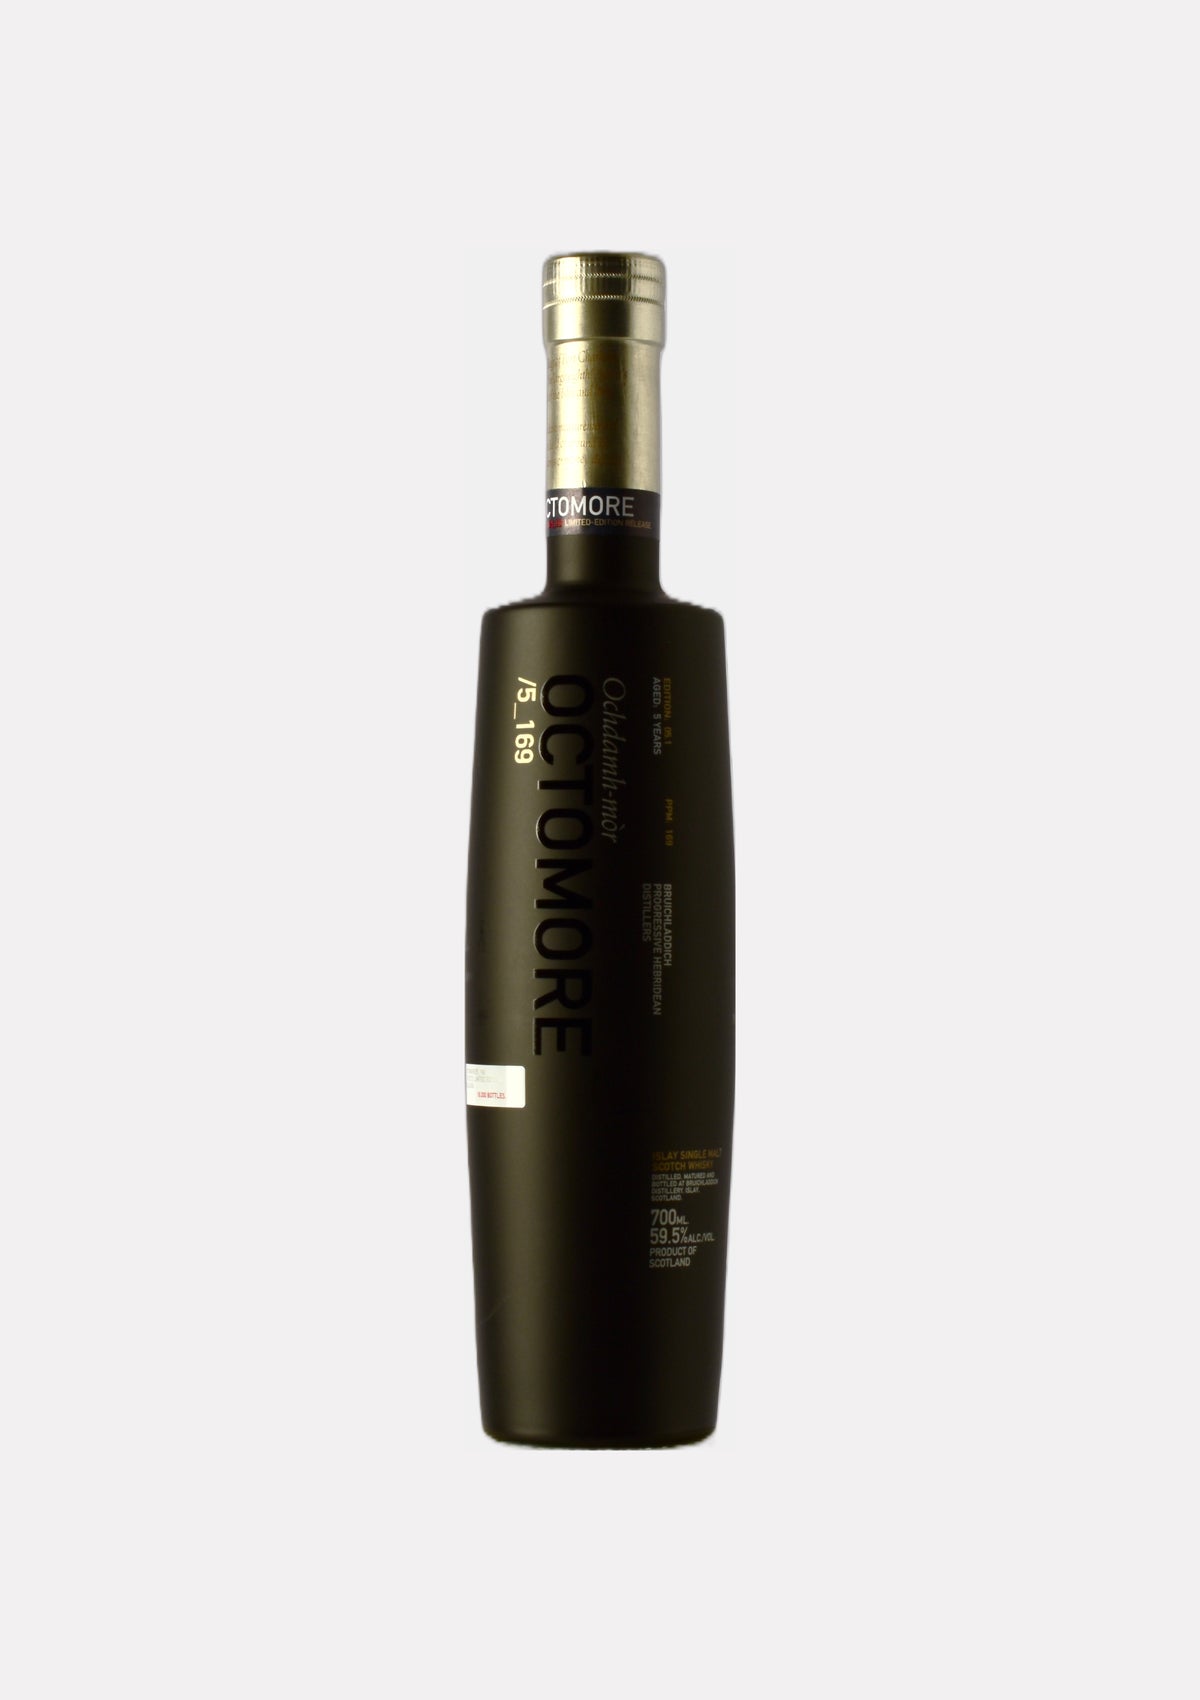 Octomore 05.1 169 ppm